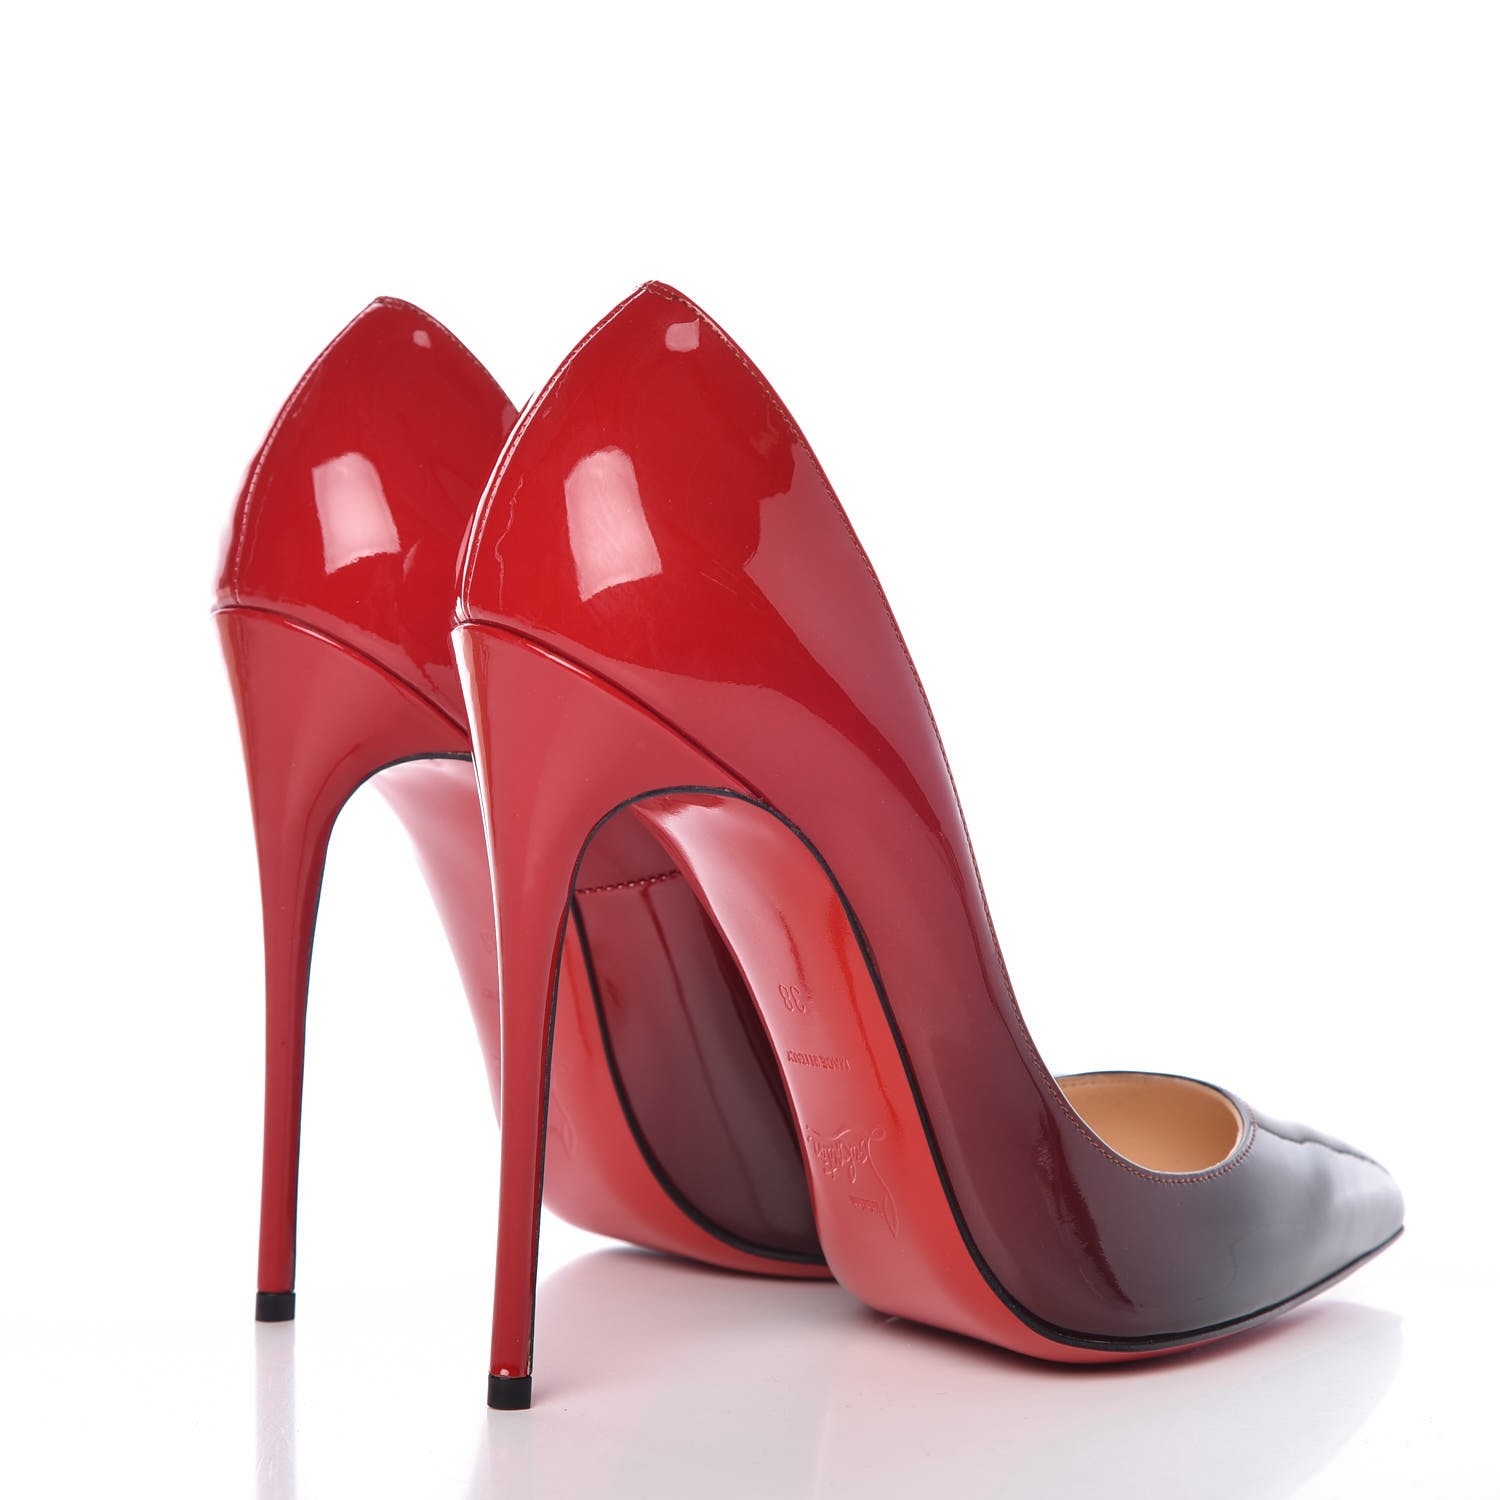 pigalle follies degrade patent red sole pump